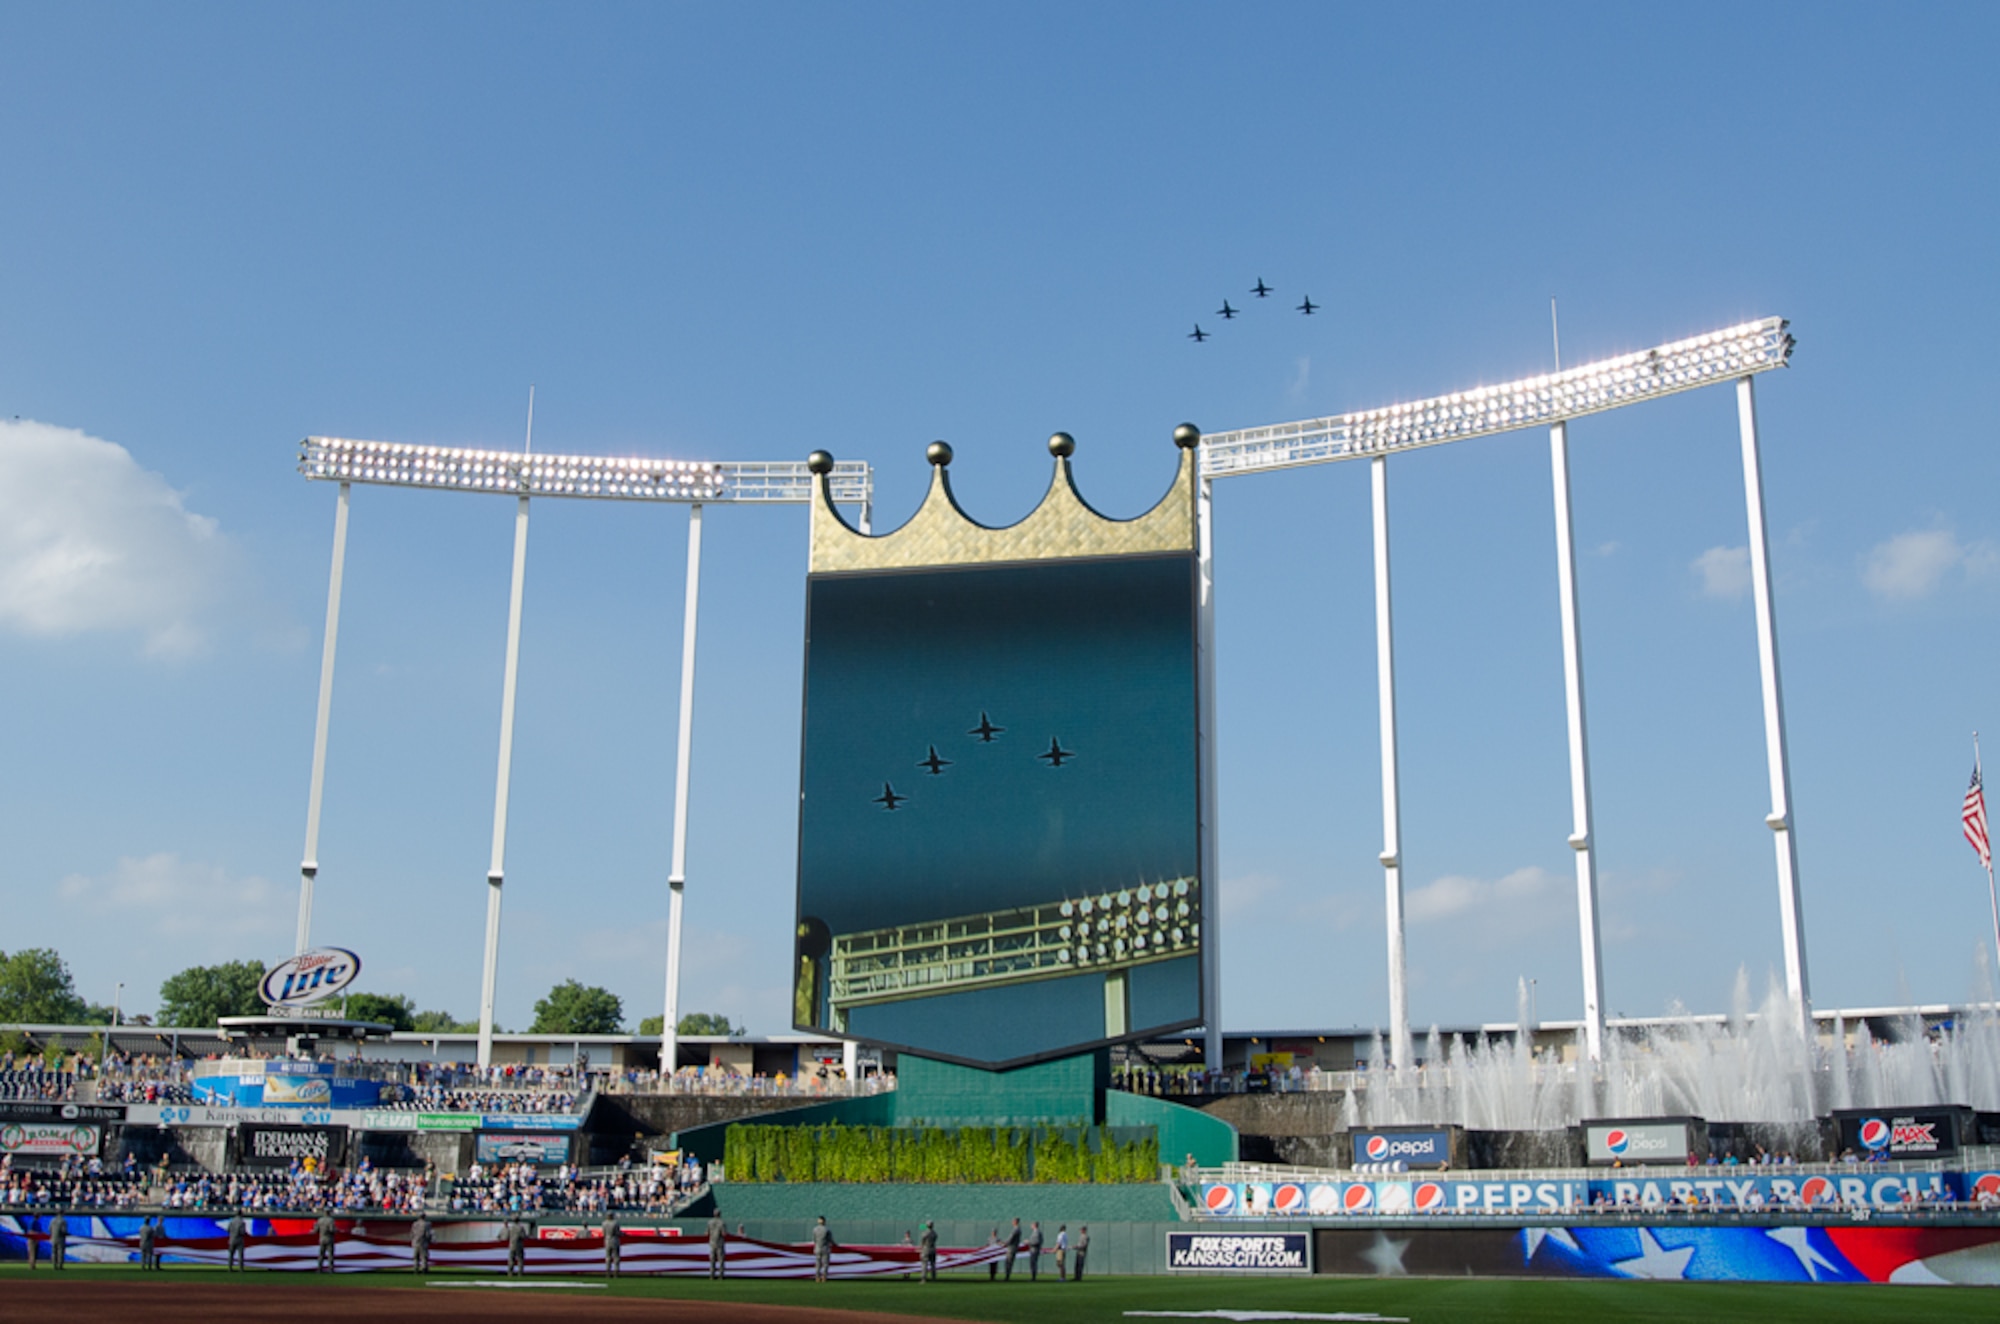 U.S. Air Force T-38 trainers fly over Kauffman Stadium during The National Anthem on Aug. 6, 2011 in Kansas City Mo. The Kansas City Royals hosted Armed Forces Day to honor all veterans of the military. (U.S. Air Force photo by Senior Airman Sheldon Thompson)